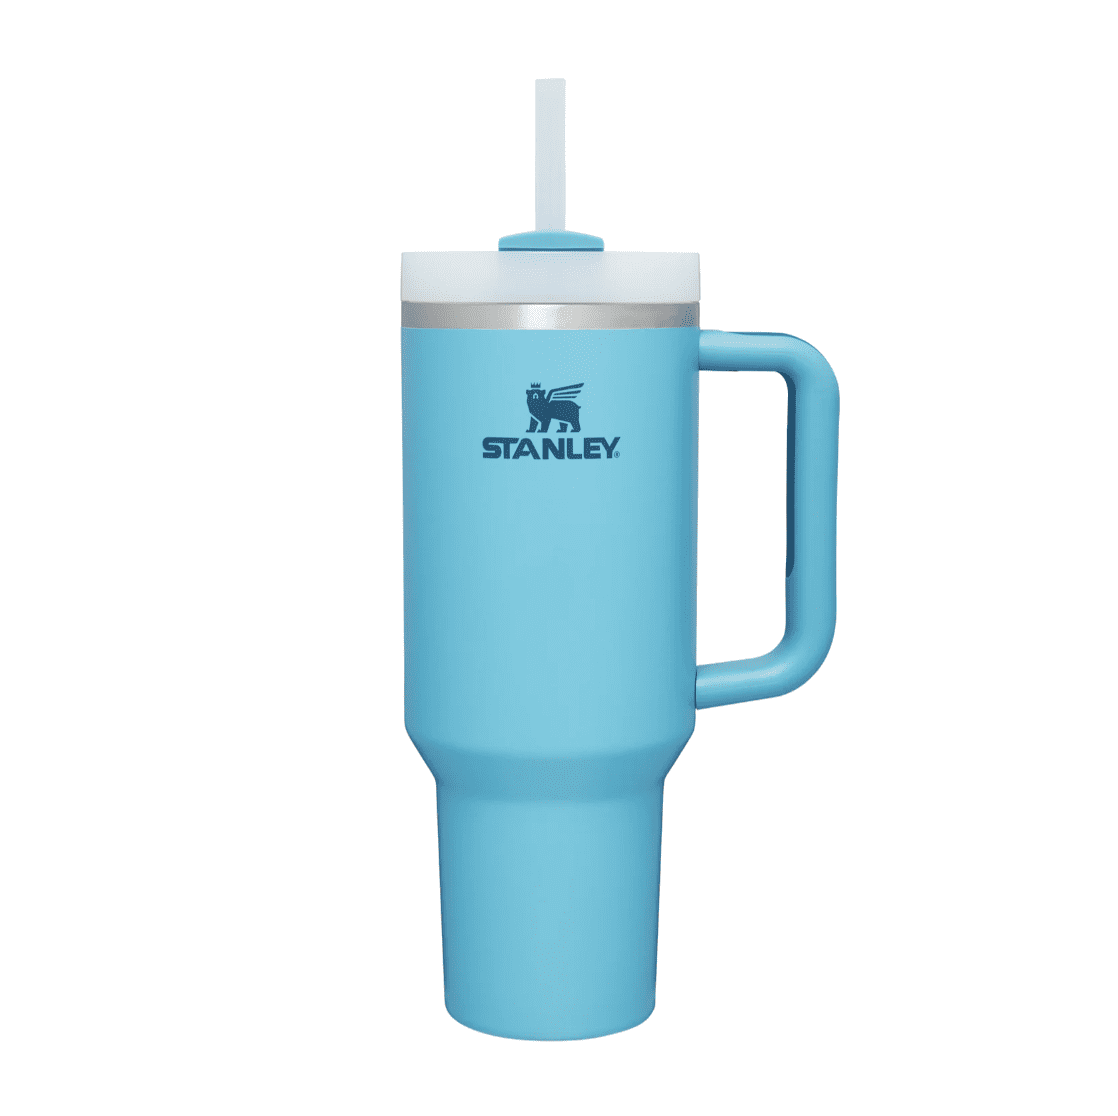 The Stanley Quencher Is Back in Stock and in 8 New Spring Colors